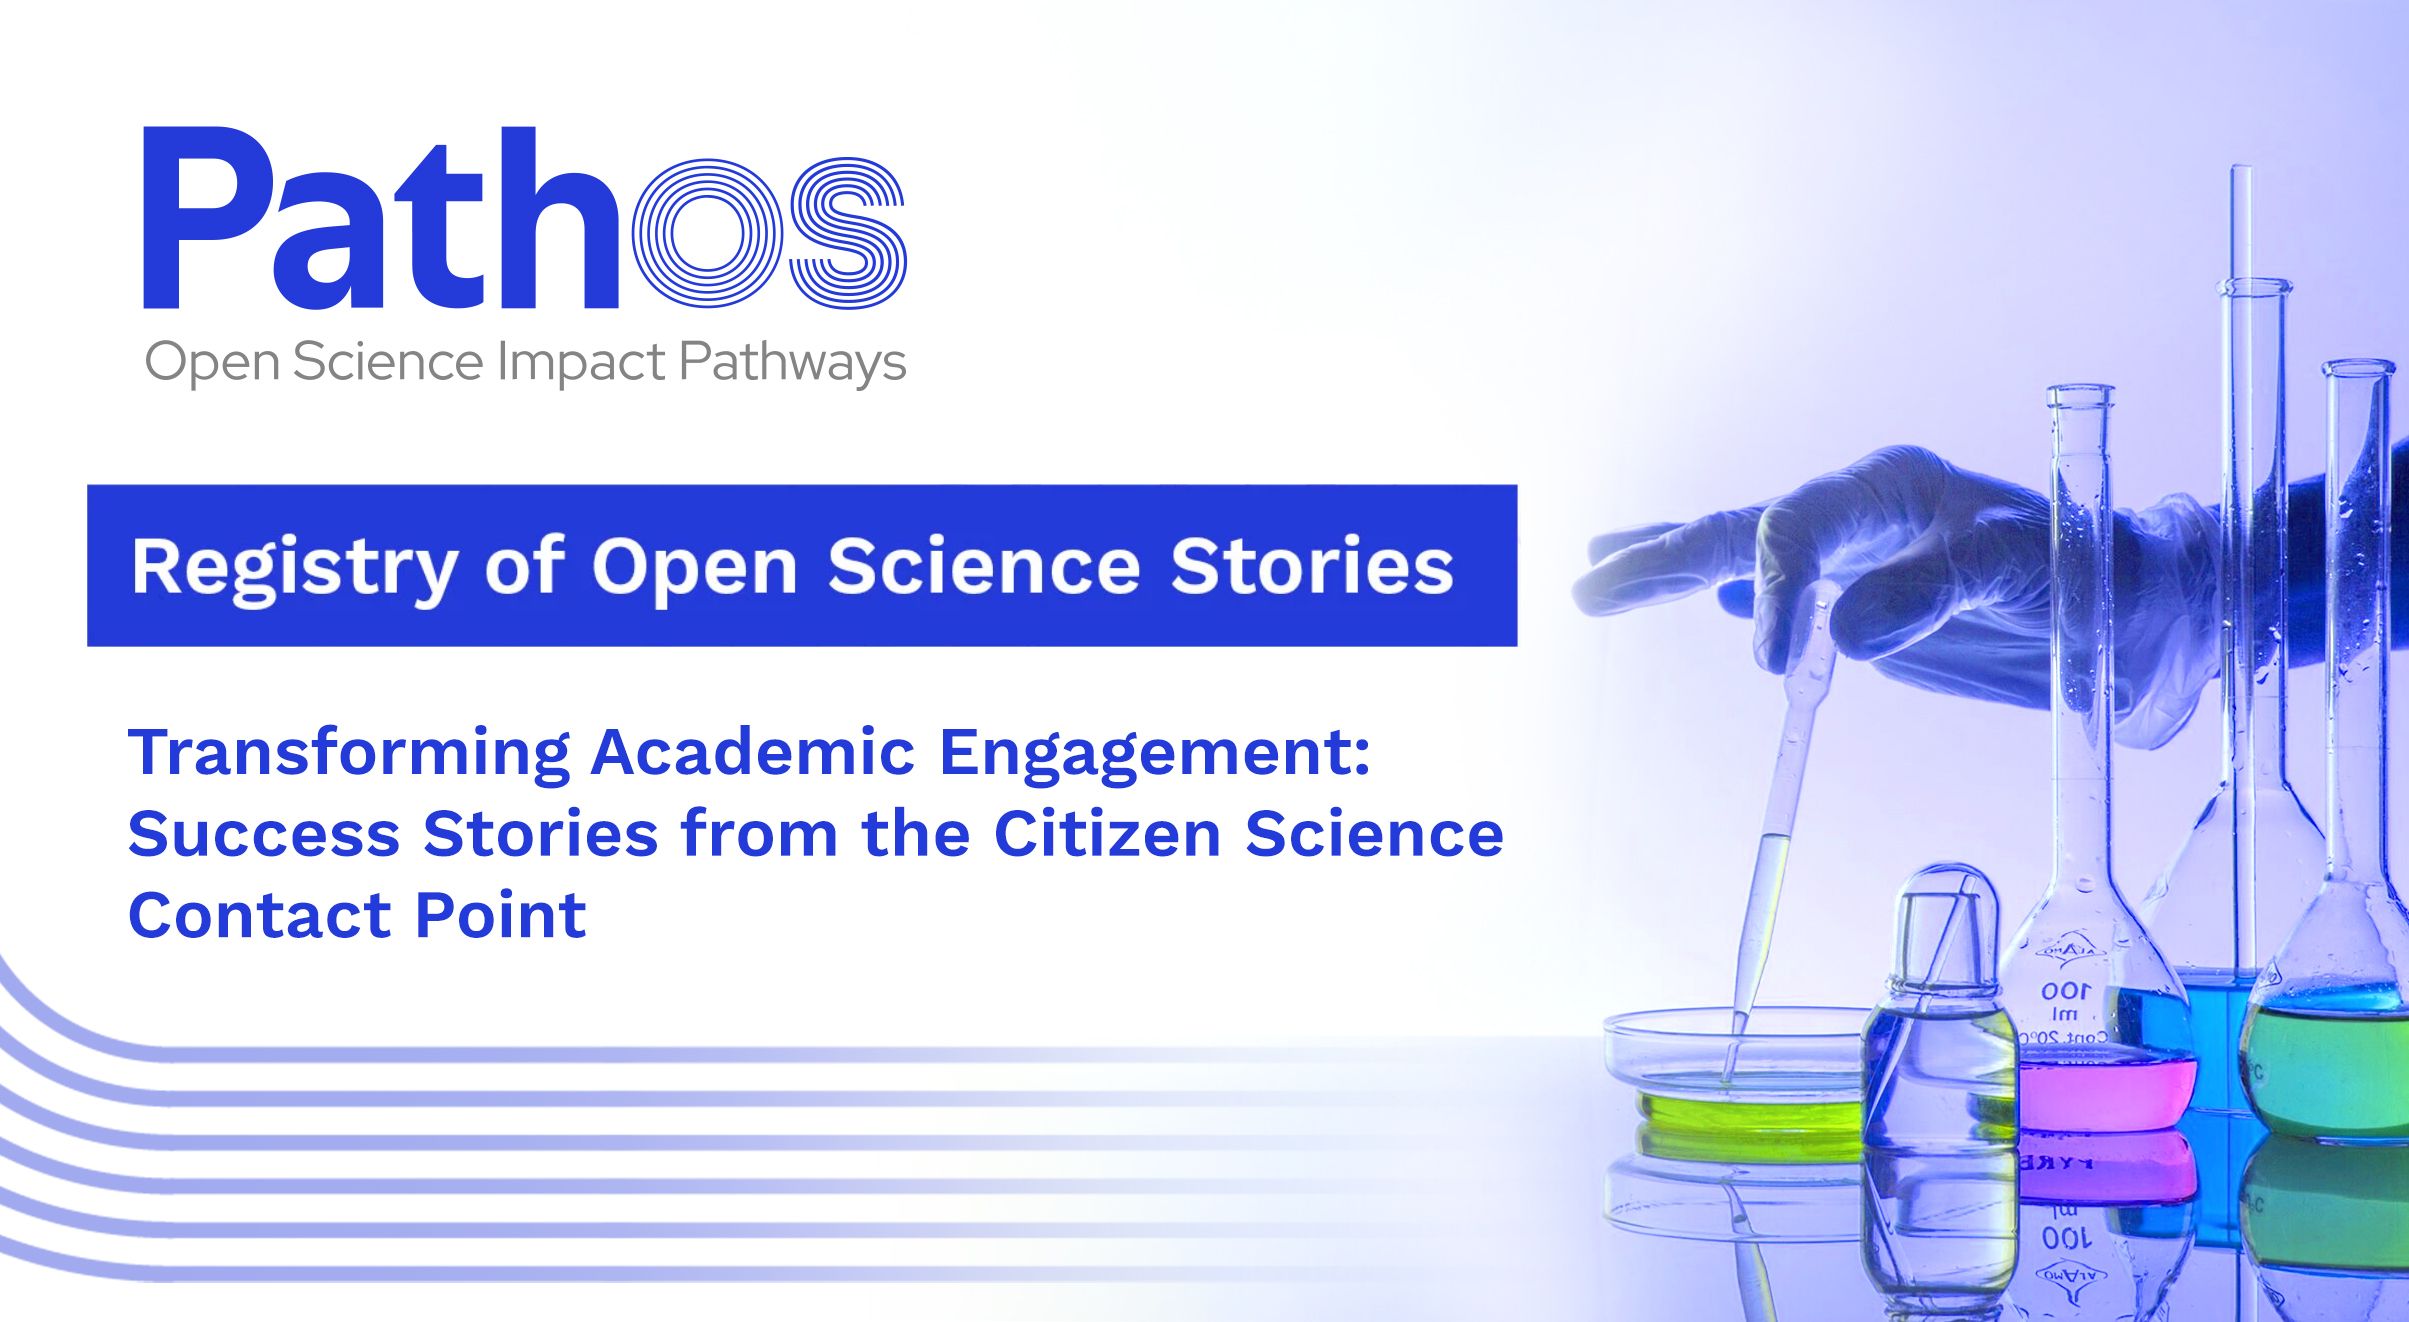 https://pathos-project.eu/transforming-academic-engagement-success-stories-from-the-citizen-science-contact-point